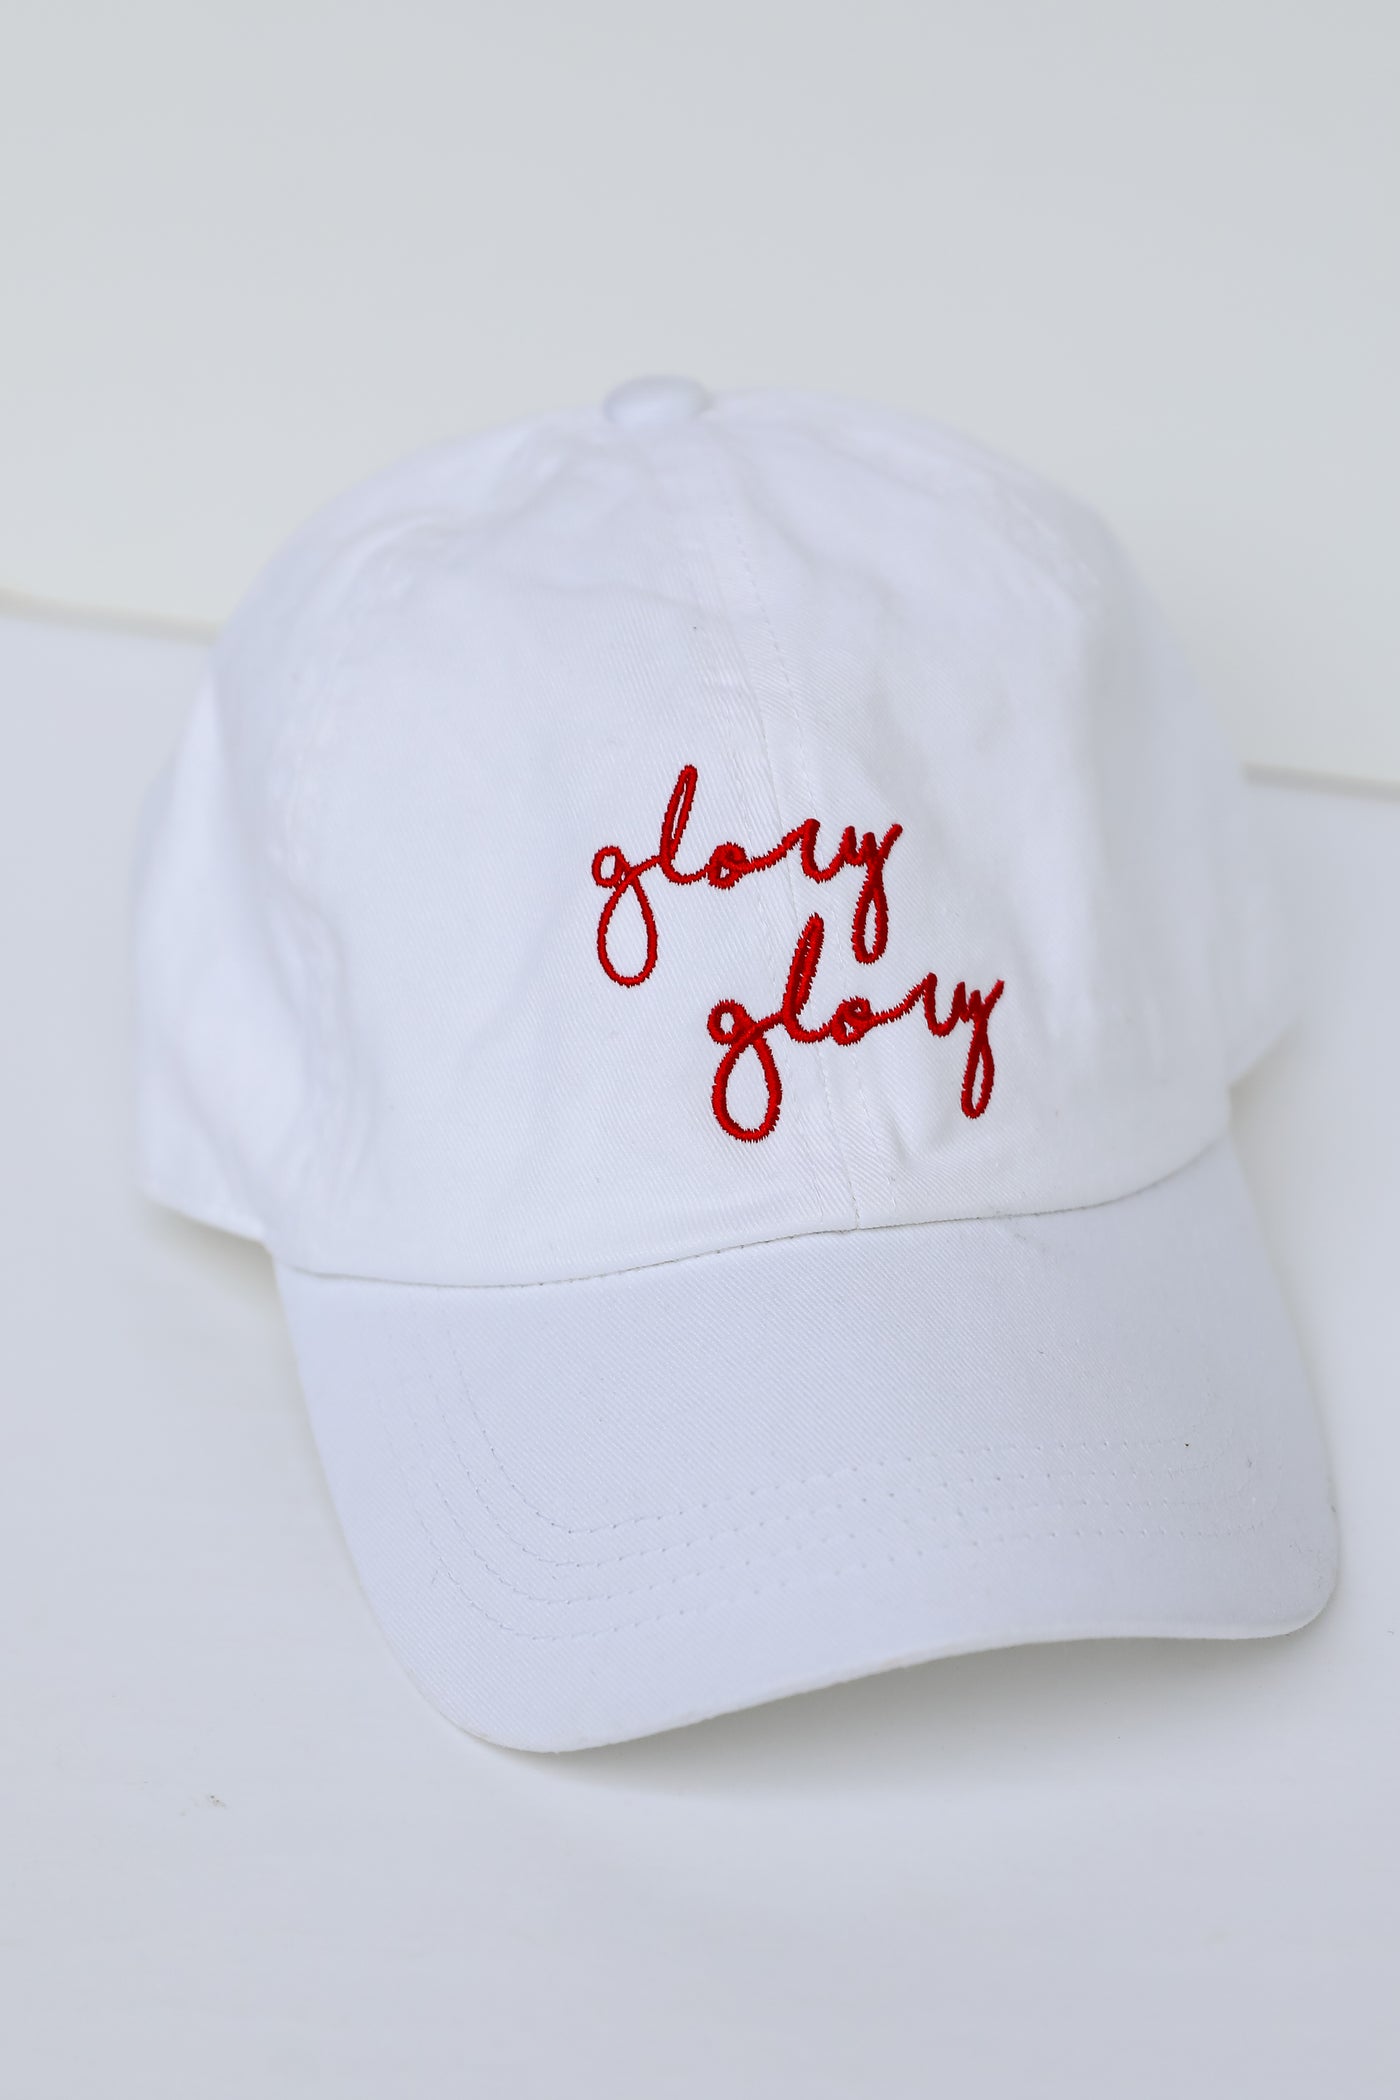 Glory Glory Embroidered Hat flat lay UGA Hats Online